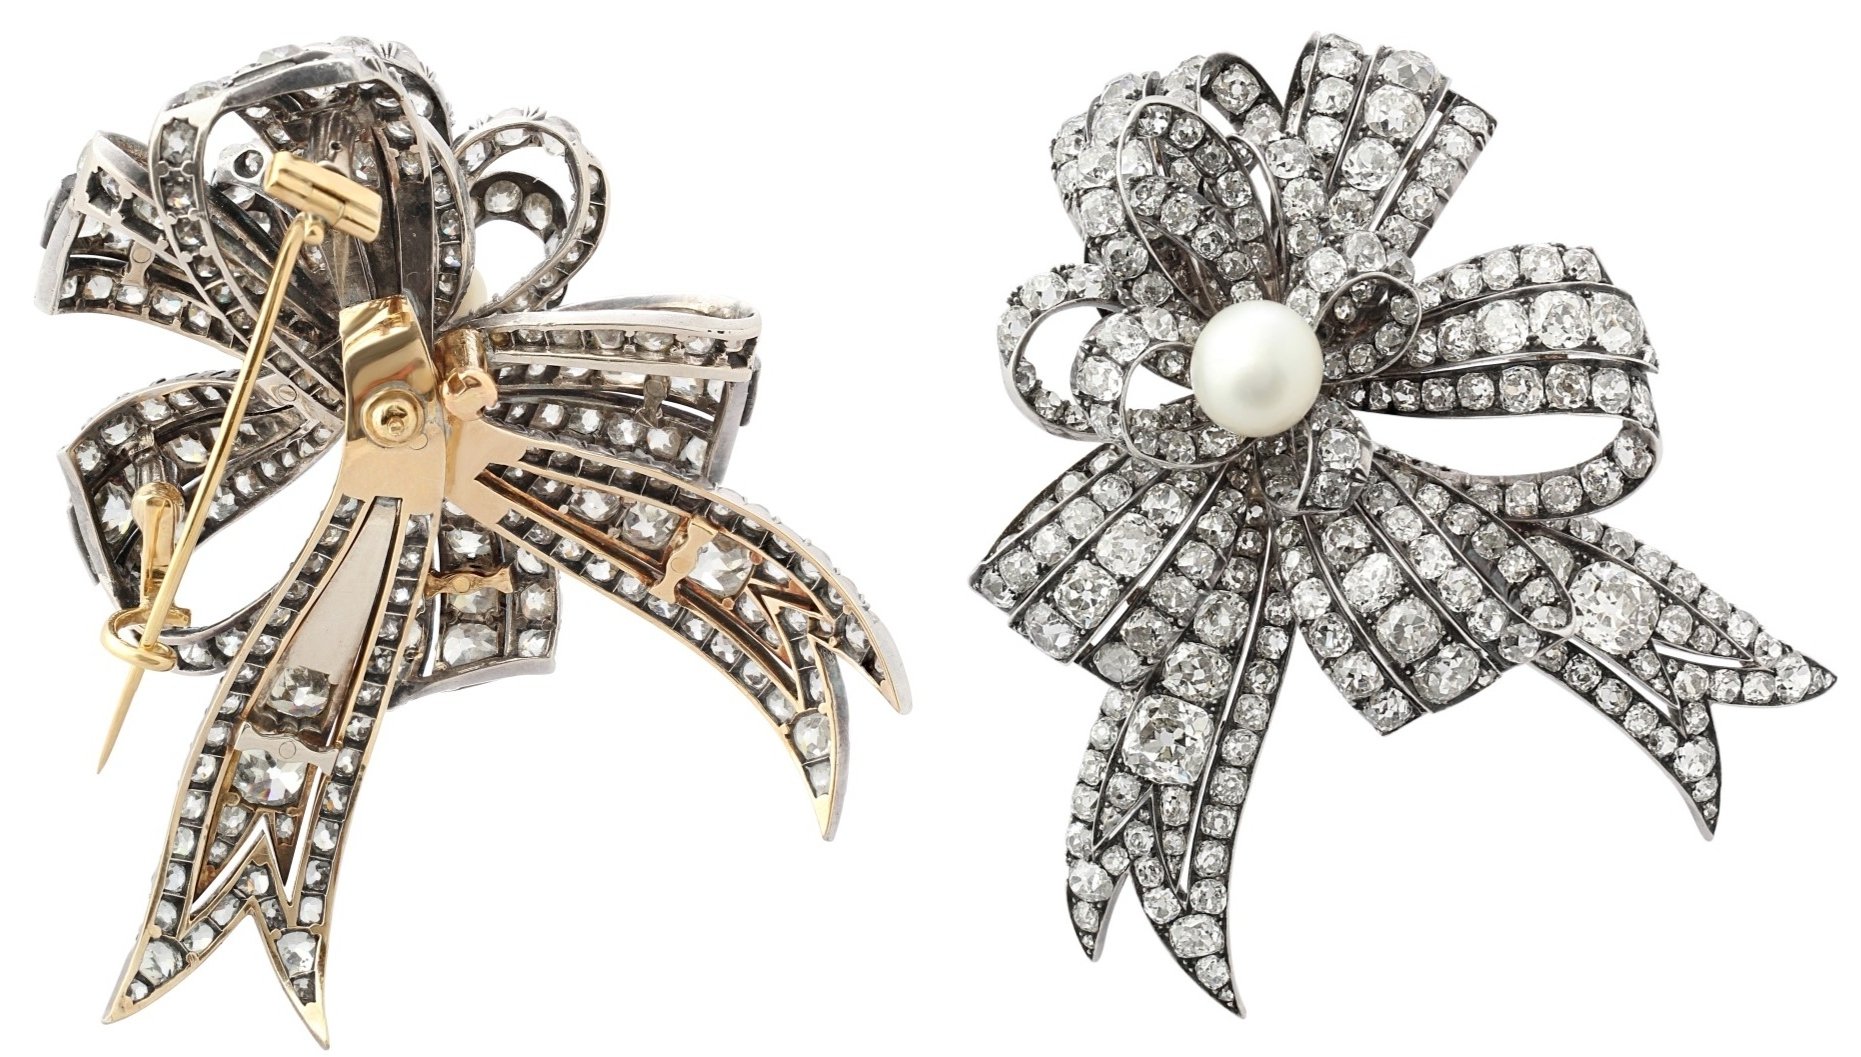 Trend Pearl Bow Brooches Small Fragrance Number 5 All-match Brooch